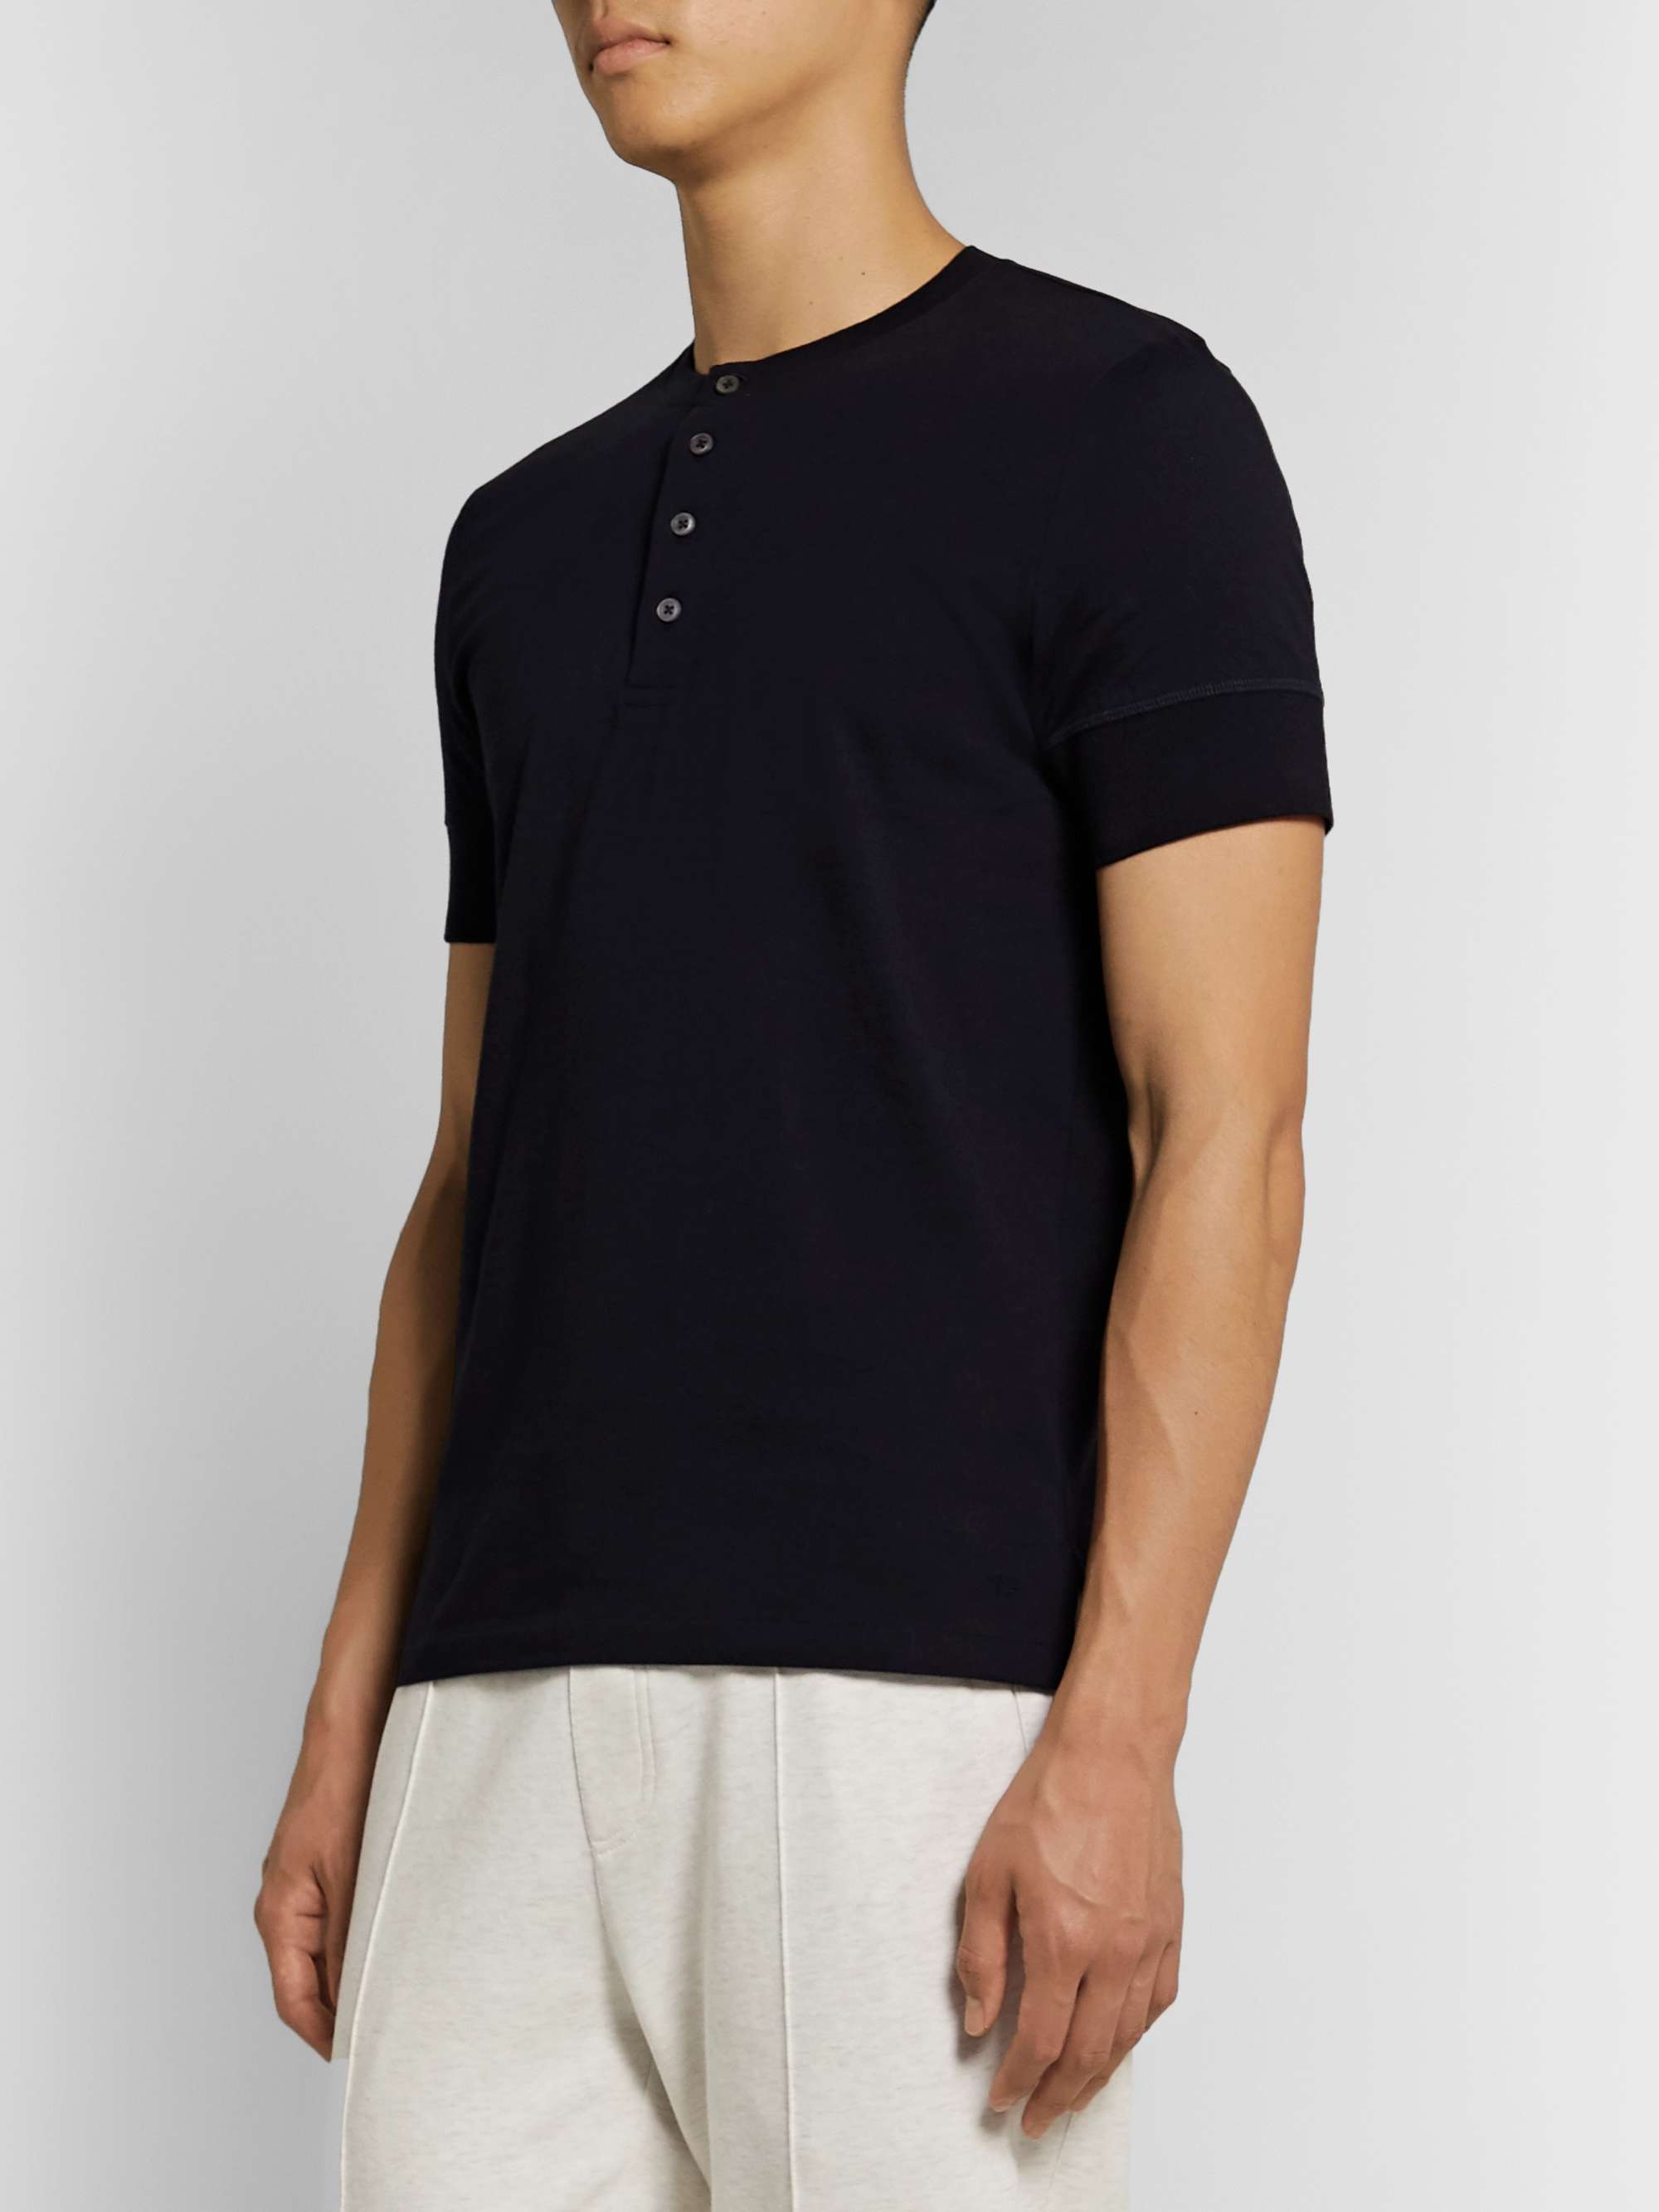 TOM FORD Slim-Fit Cotton-Jersey Henley T-Shirt